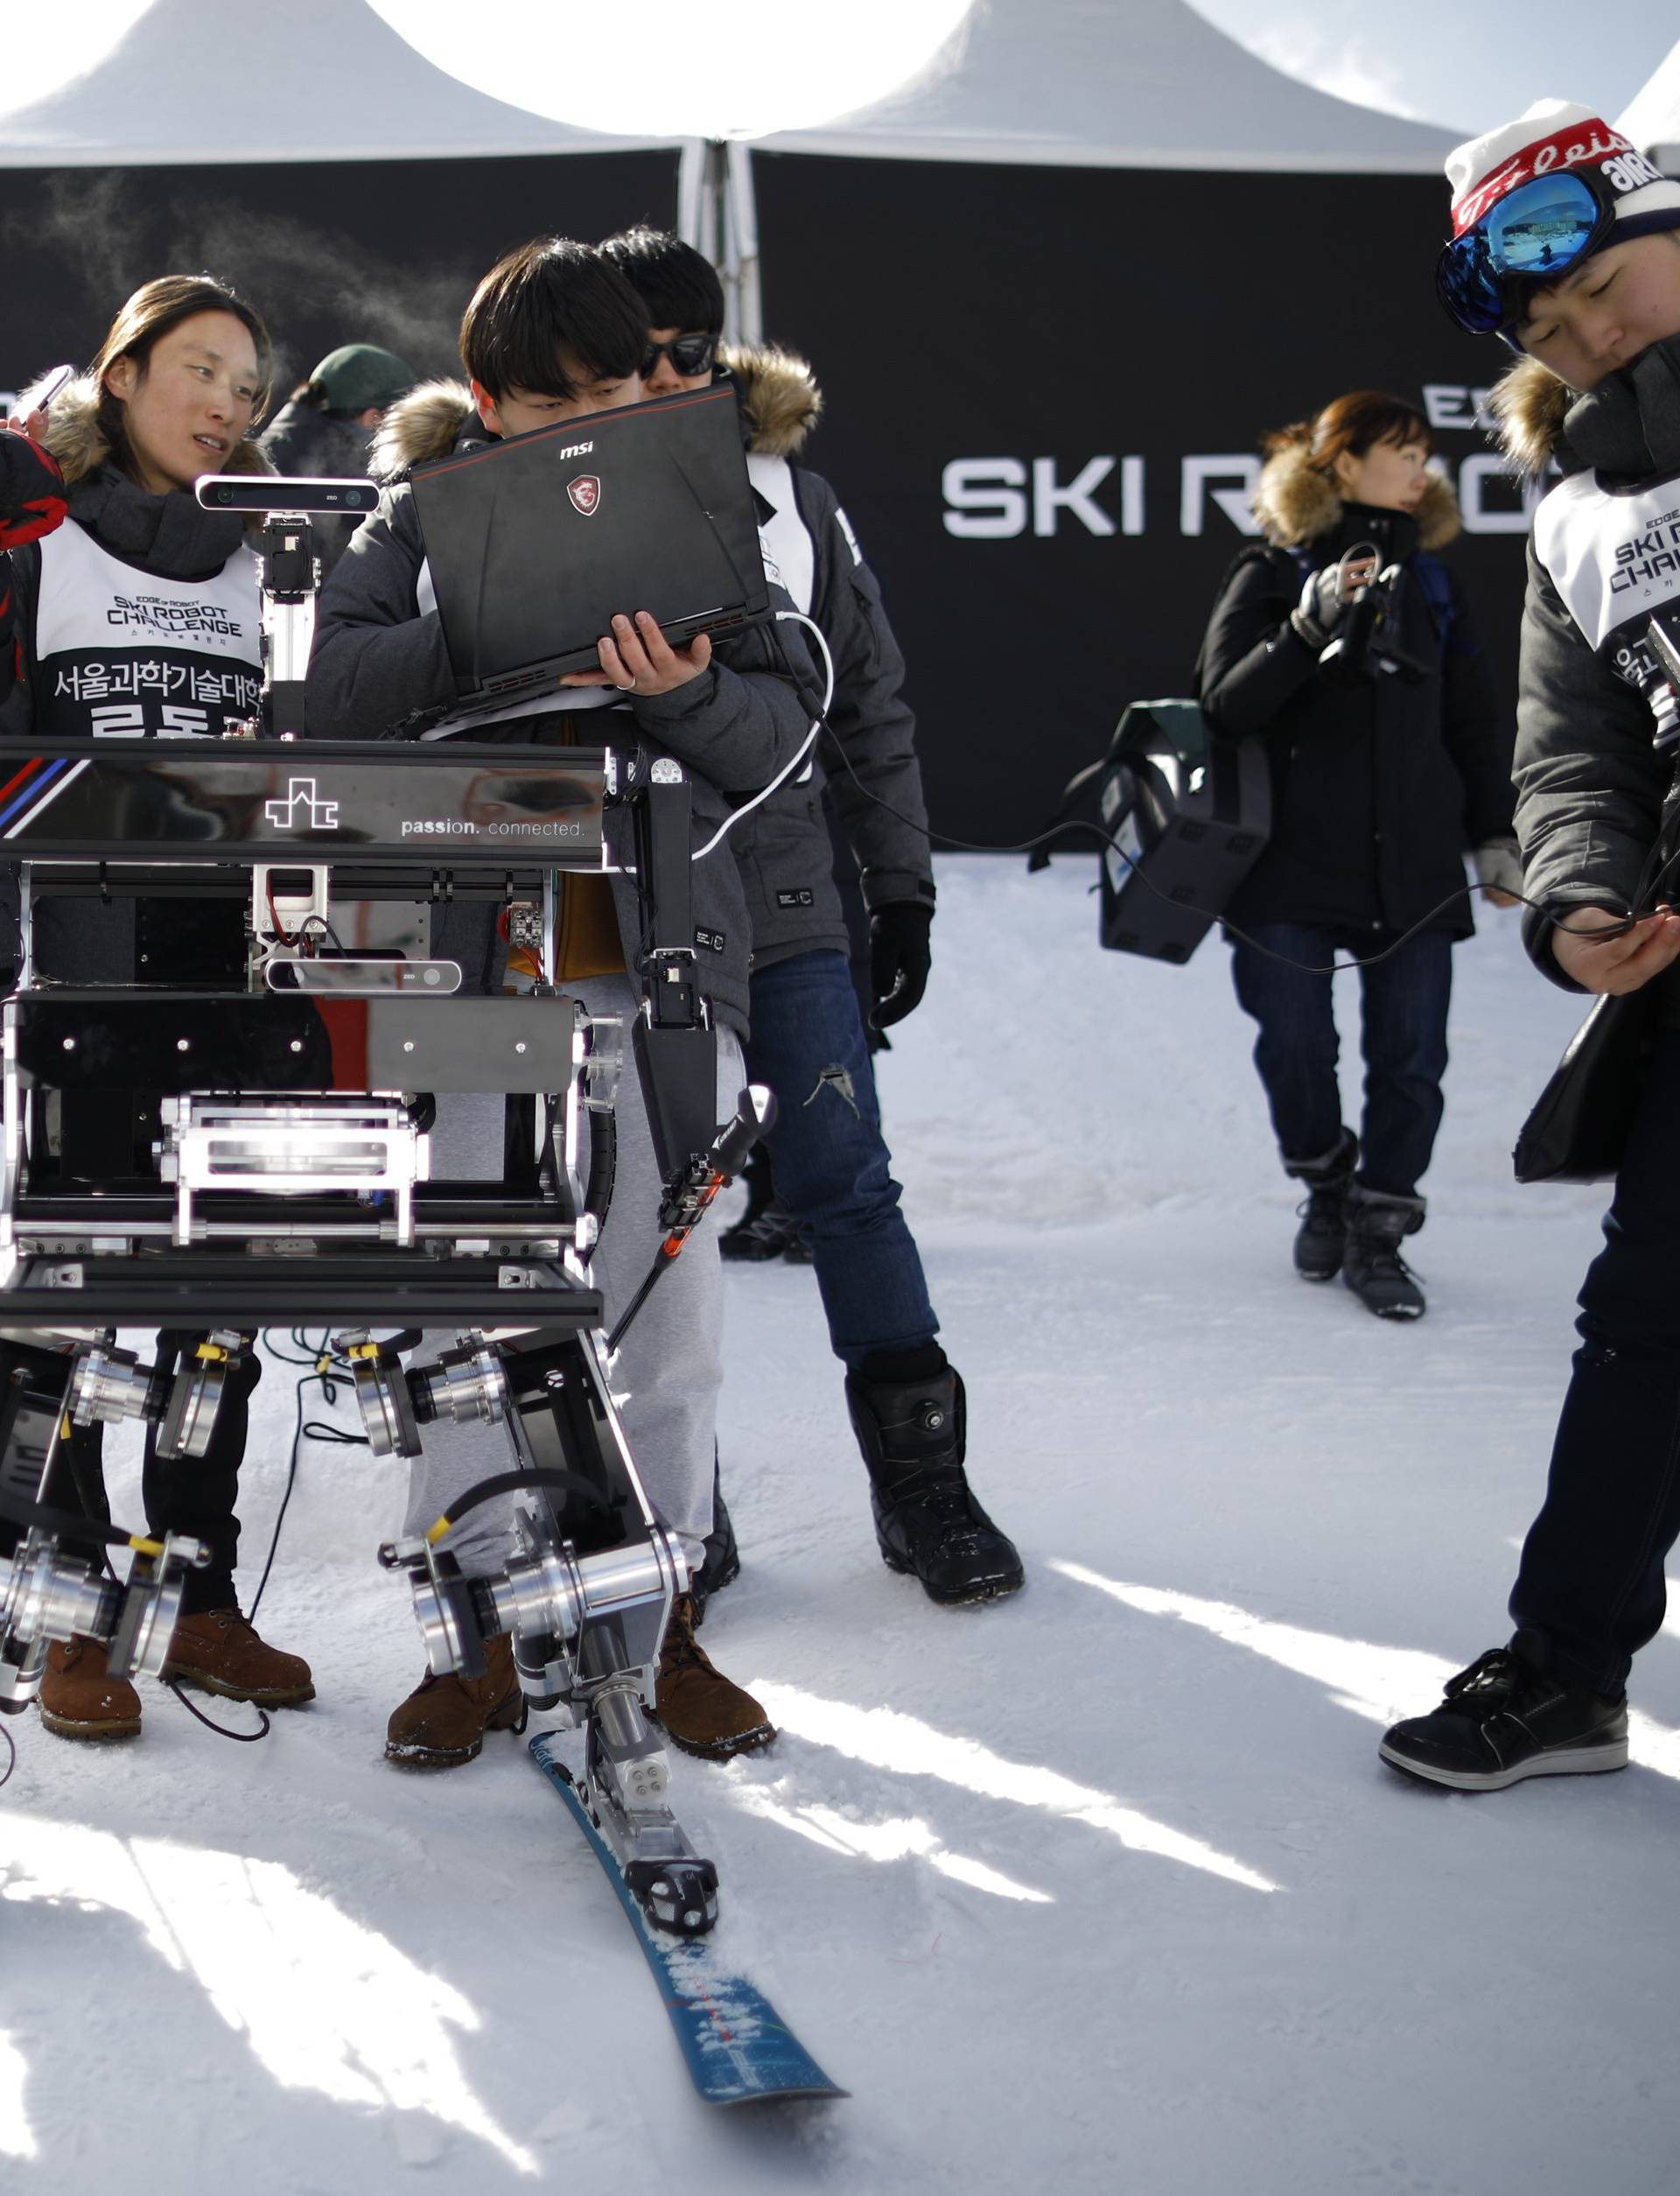 Robot Rudolph takes part in the Ski Robot Challenge at a ski resort in Hoenseong,